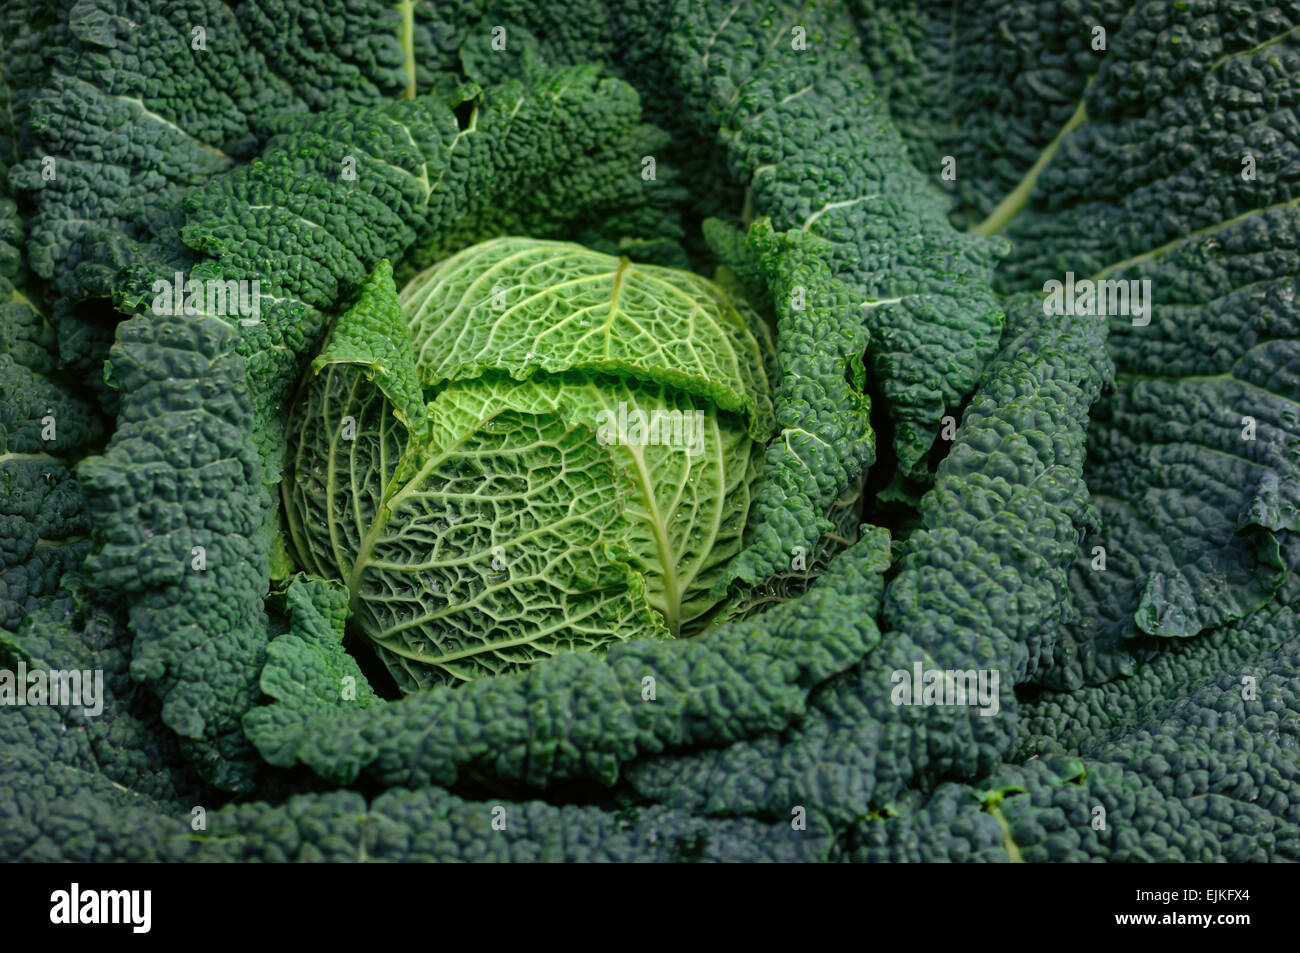 Full organic Curly green Cabbage close up Stock Photo